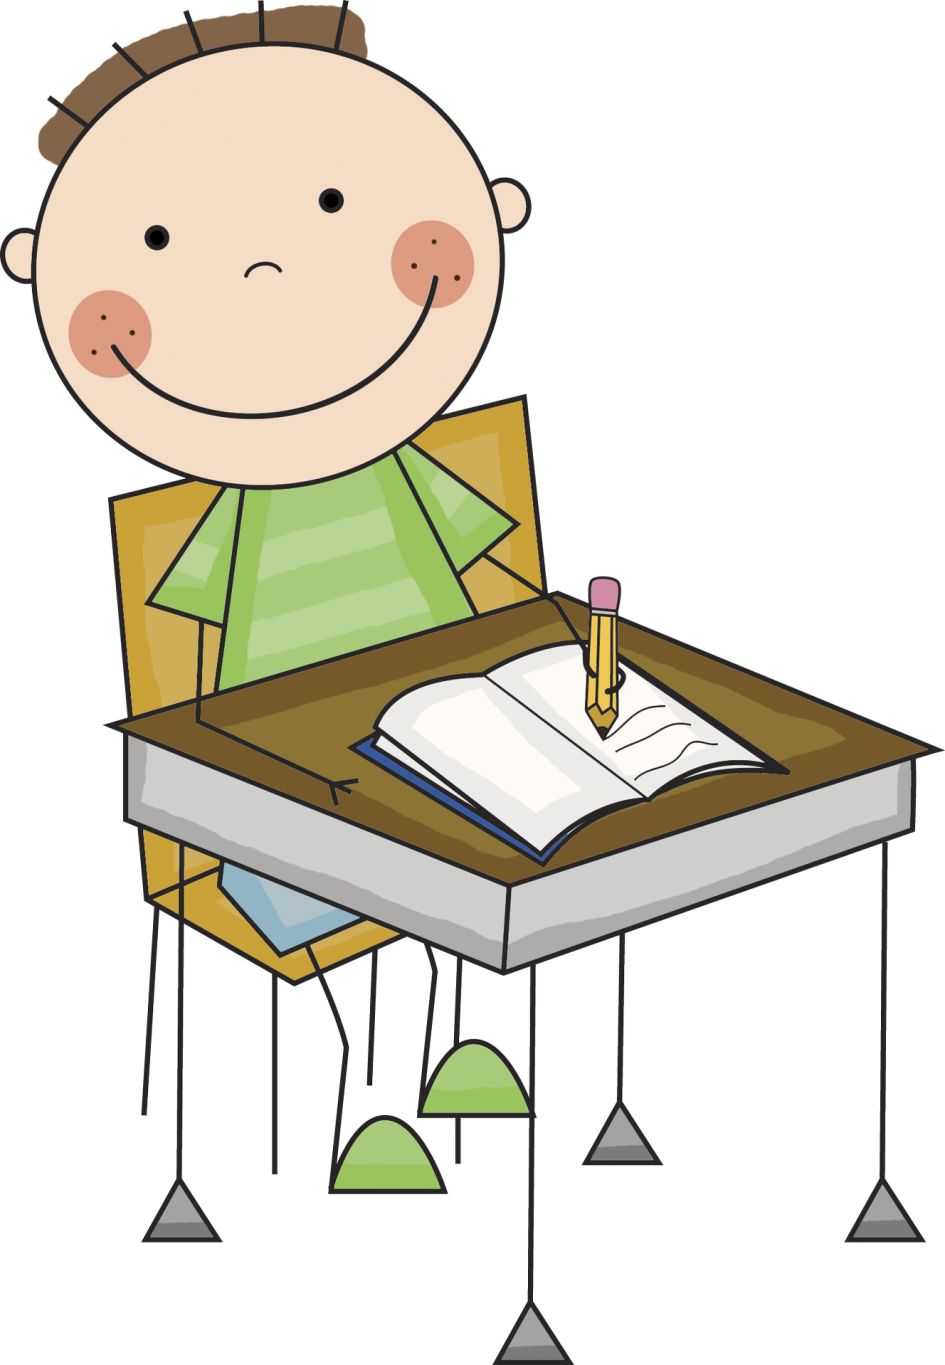 Clip art for the. Name clipart handwriting